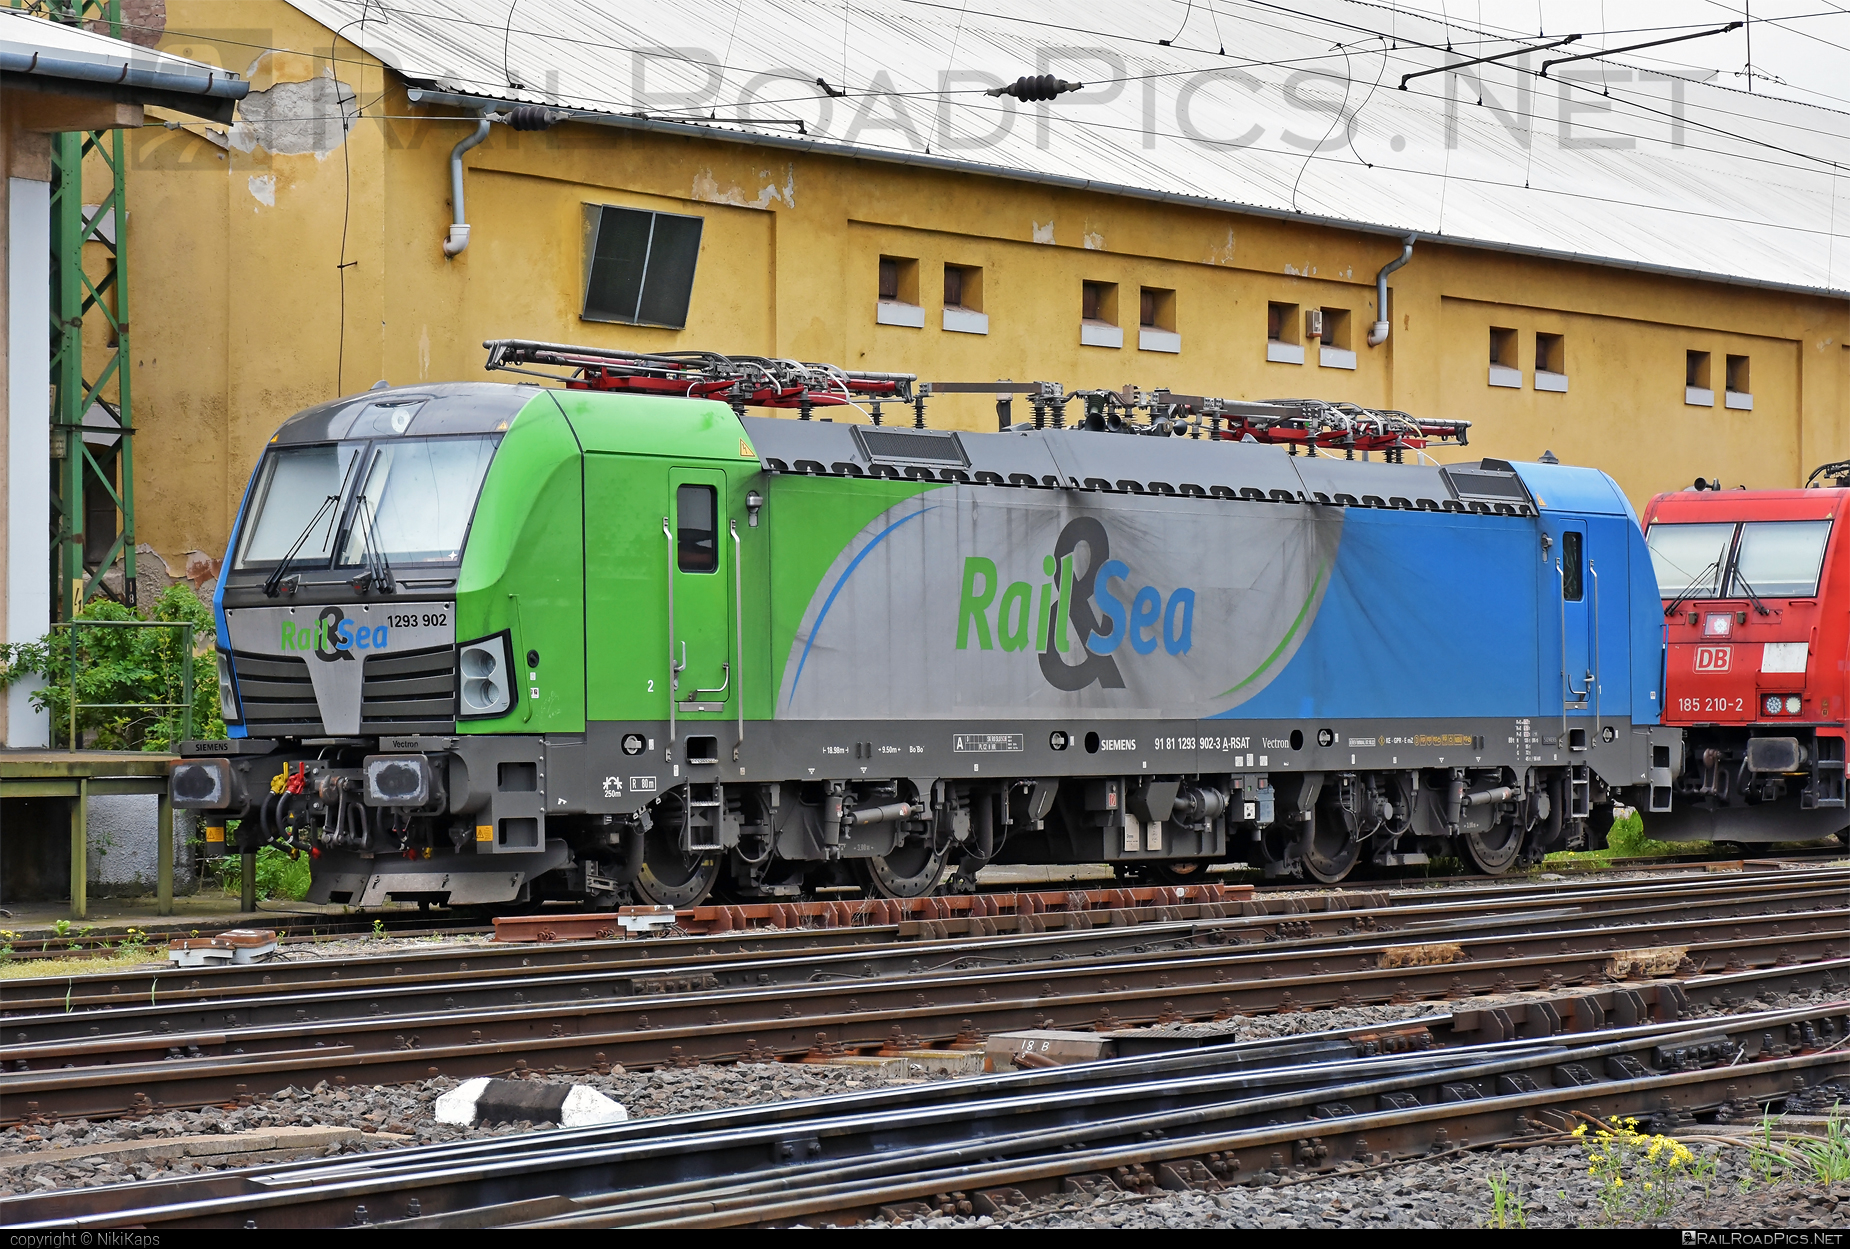 Siemens Vectron MS - 1293 902 operated by Rail&Sea Logistics GmbH #railAndSeaLogistics #railAndSeaLogisticsGmbH #railandsea #railsea #siemens #siemensVectron #siemensVectronMS #vectron #vectronMS